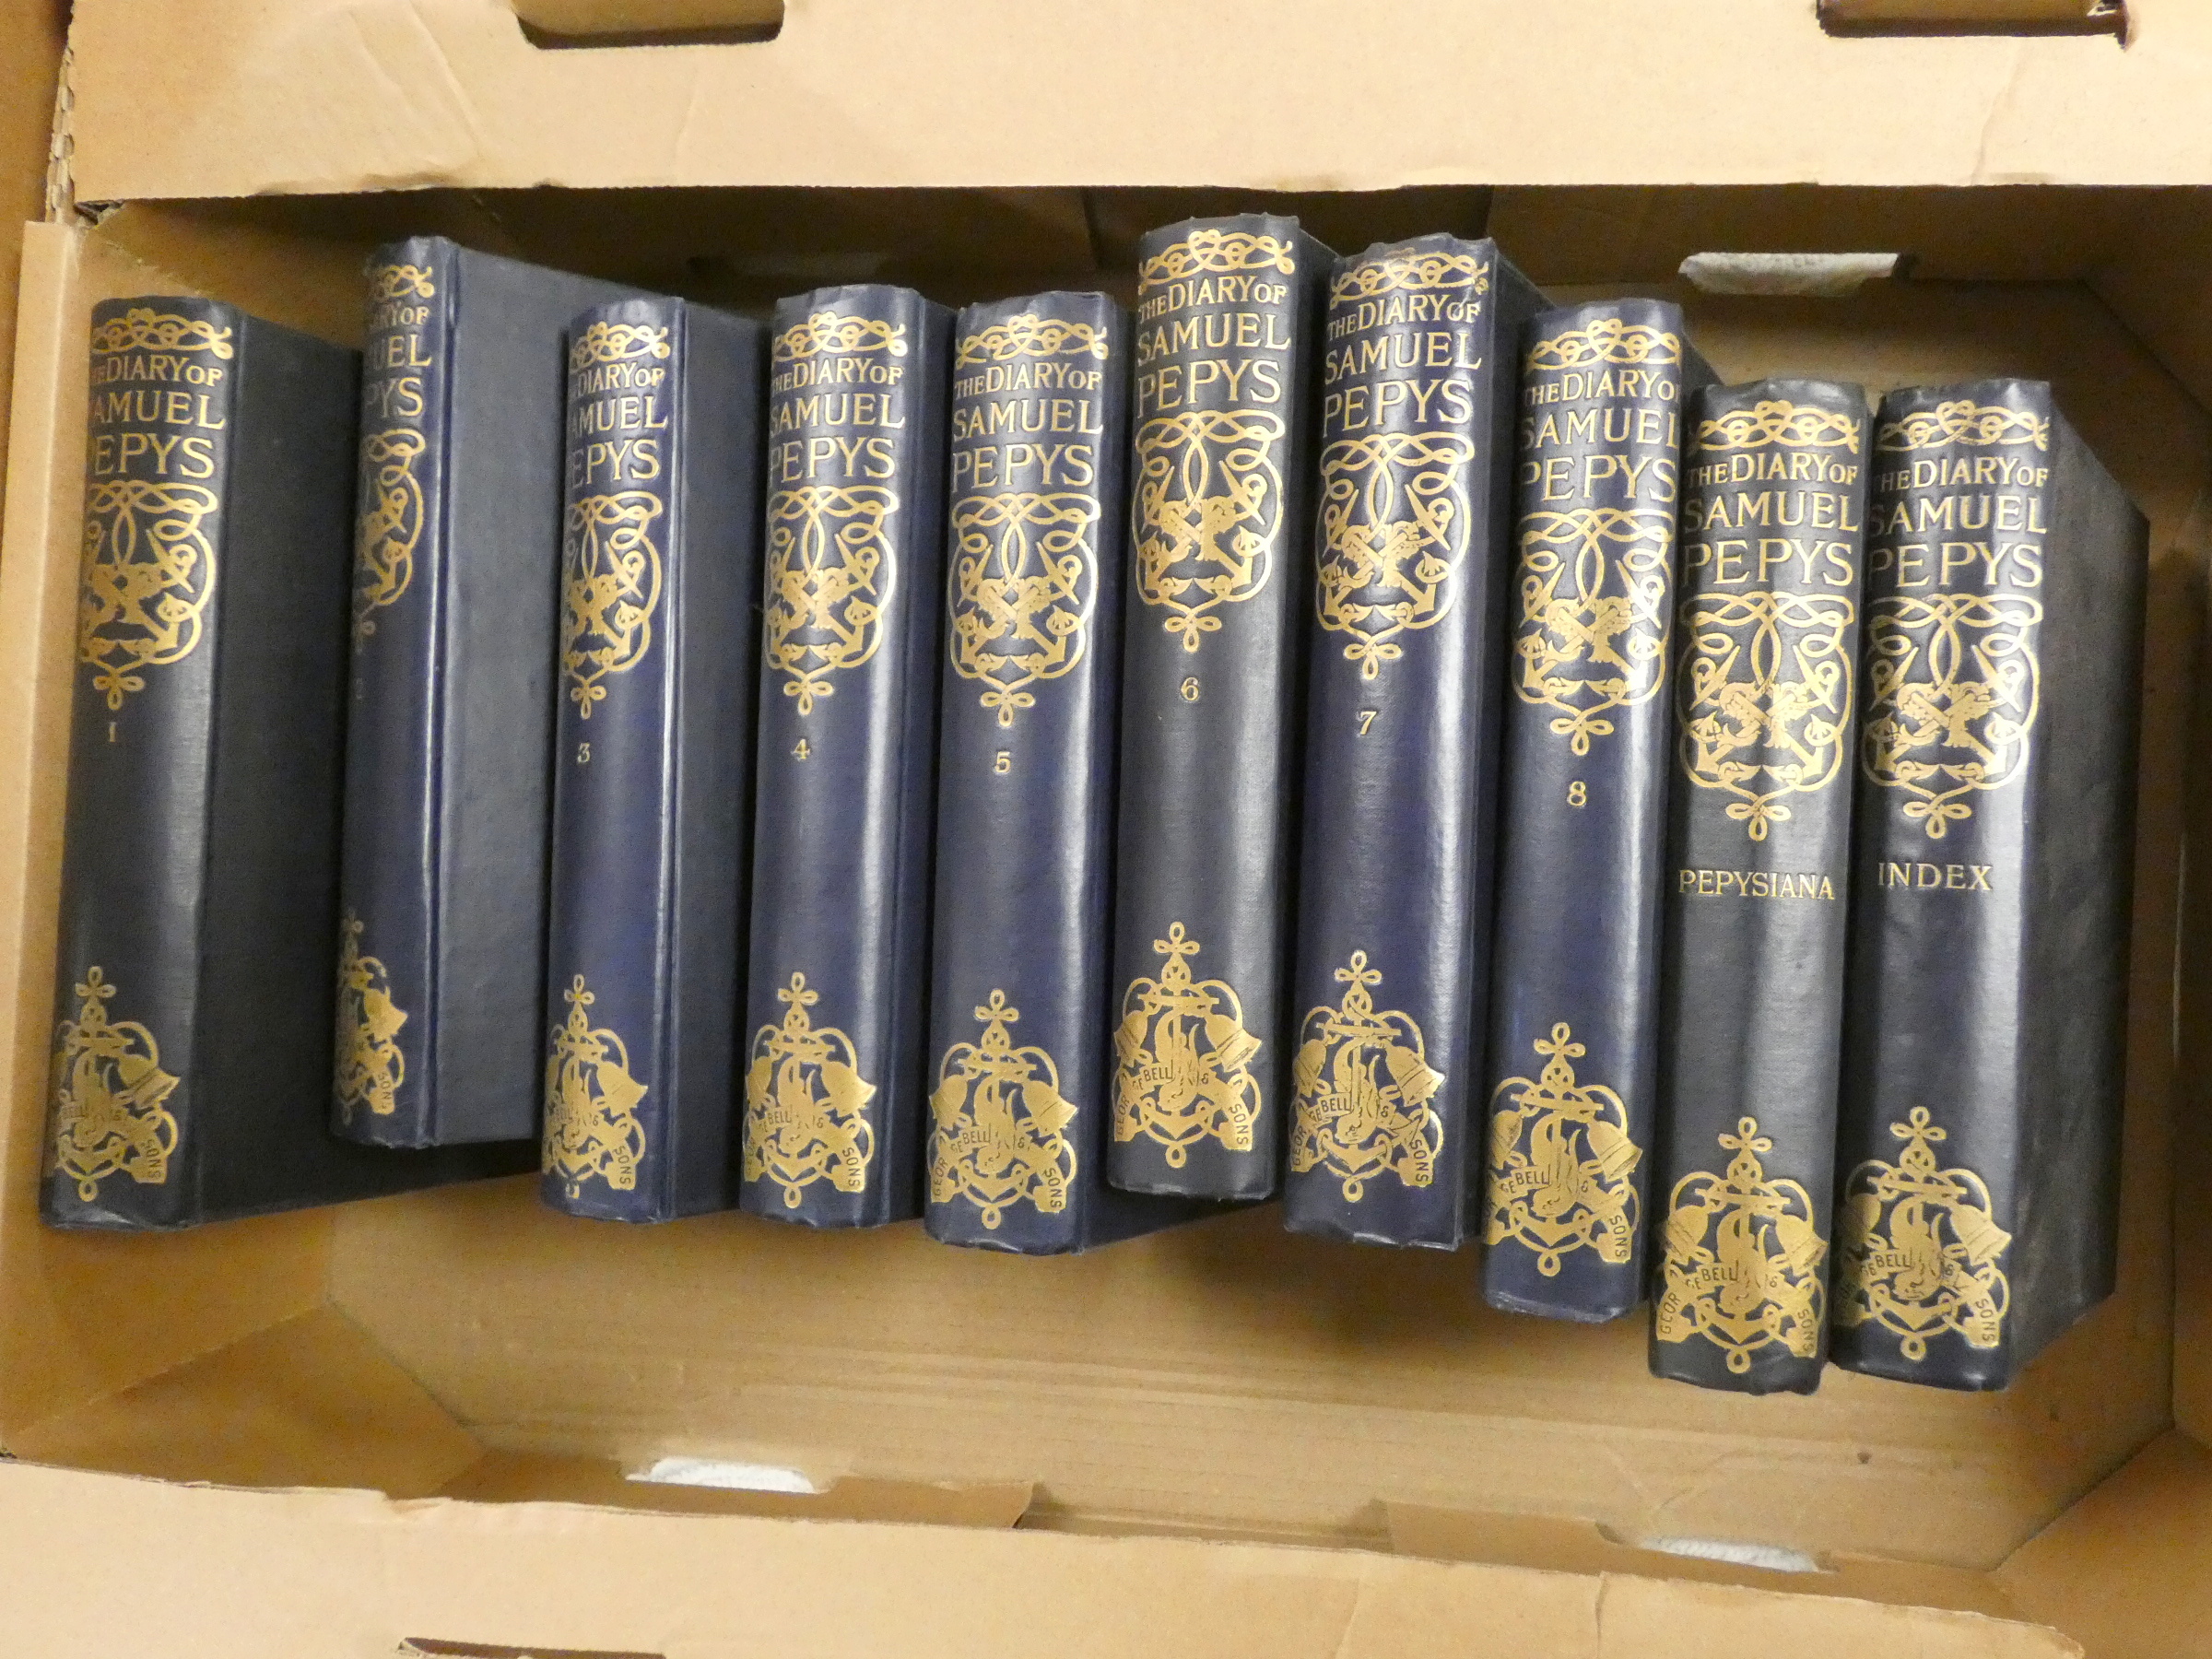 PEPYS SAMUEL.  The Diary with Pepysiana & Index, ed. by H. B. Wheatley. 10 vols. Illus. Orig. blue